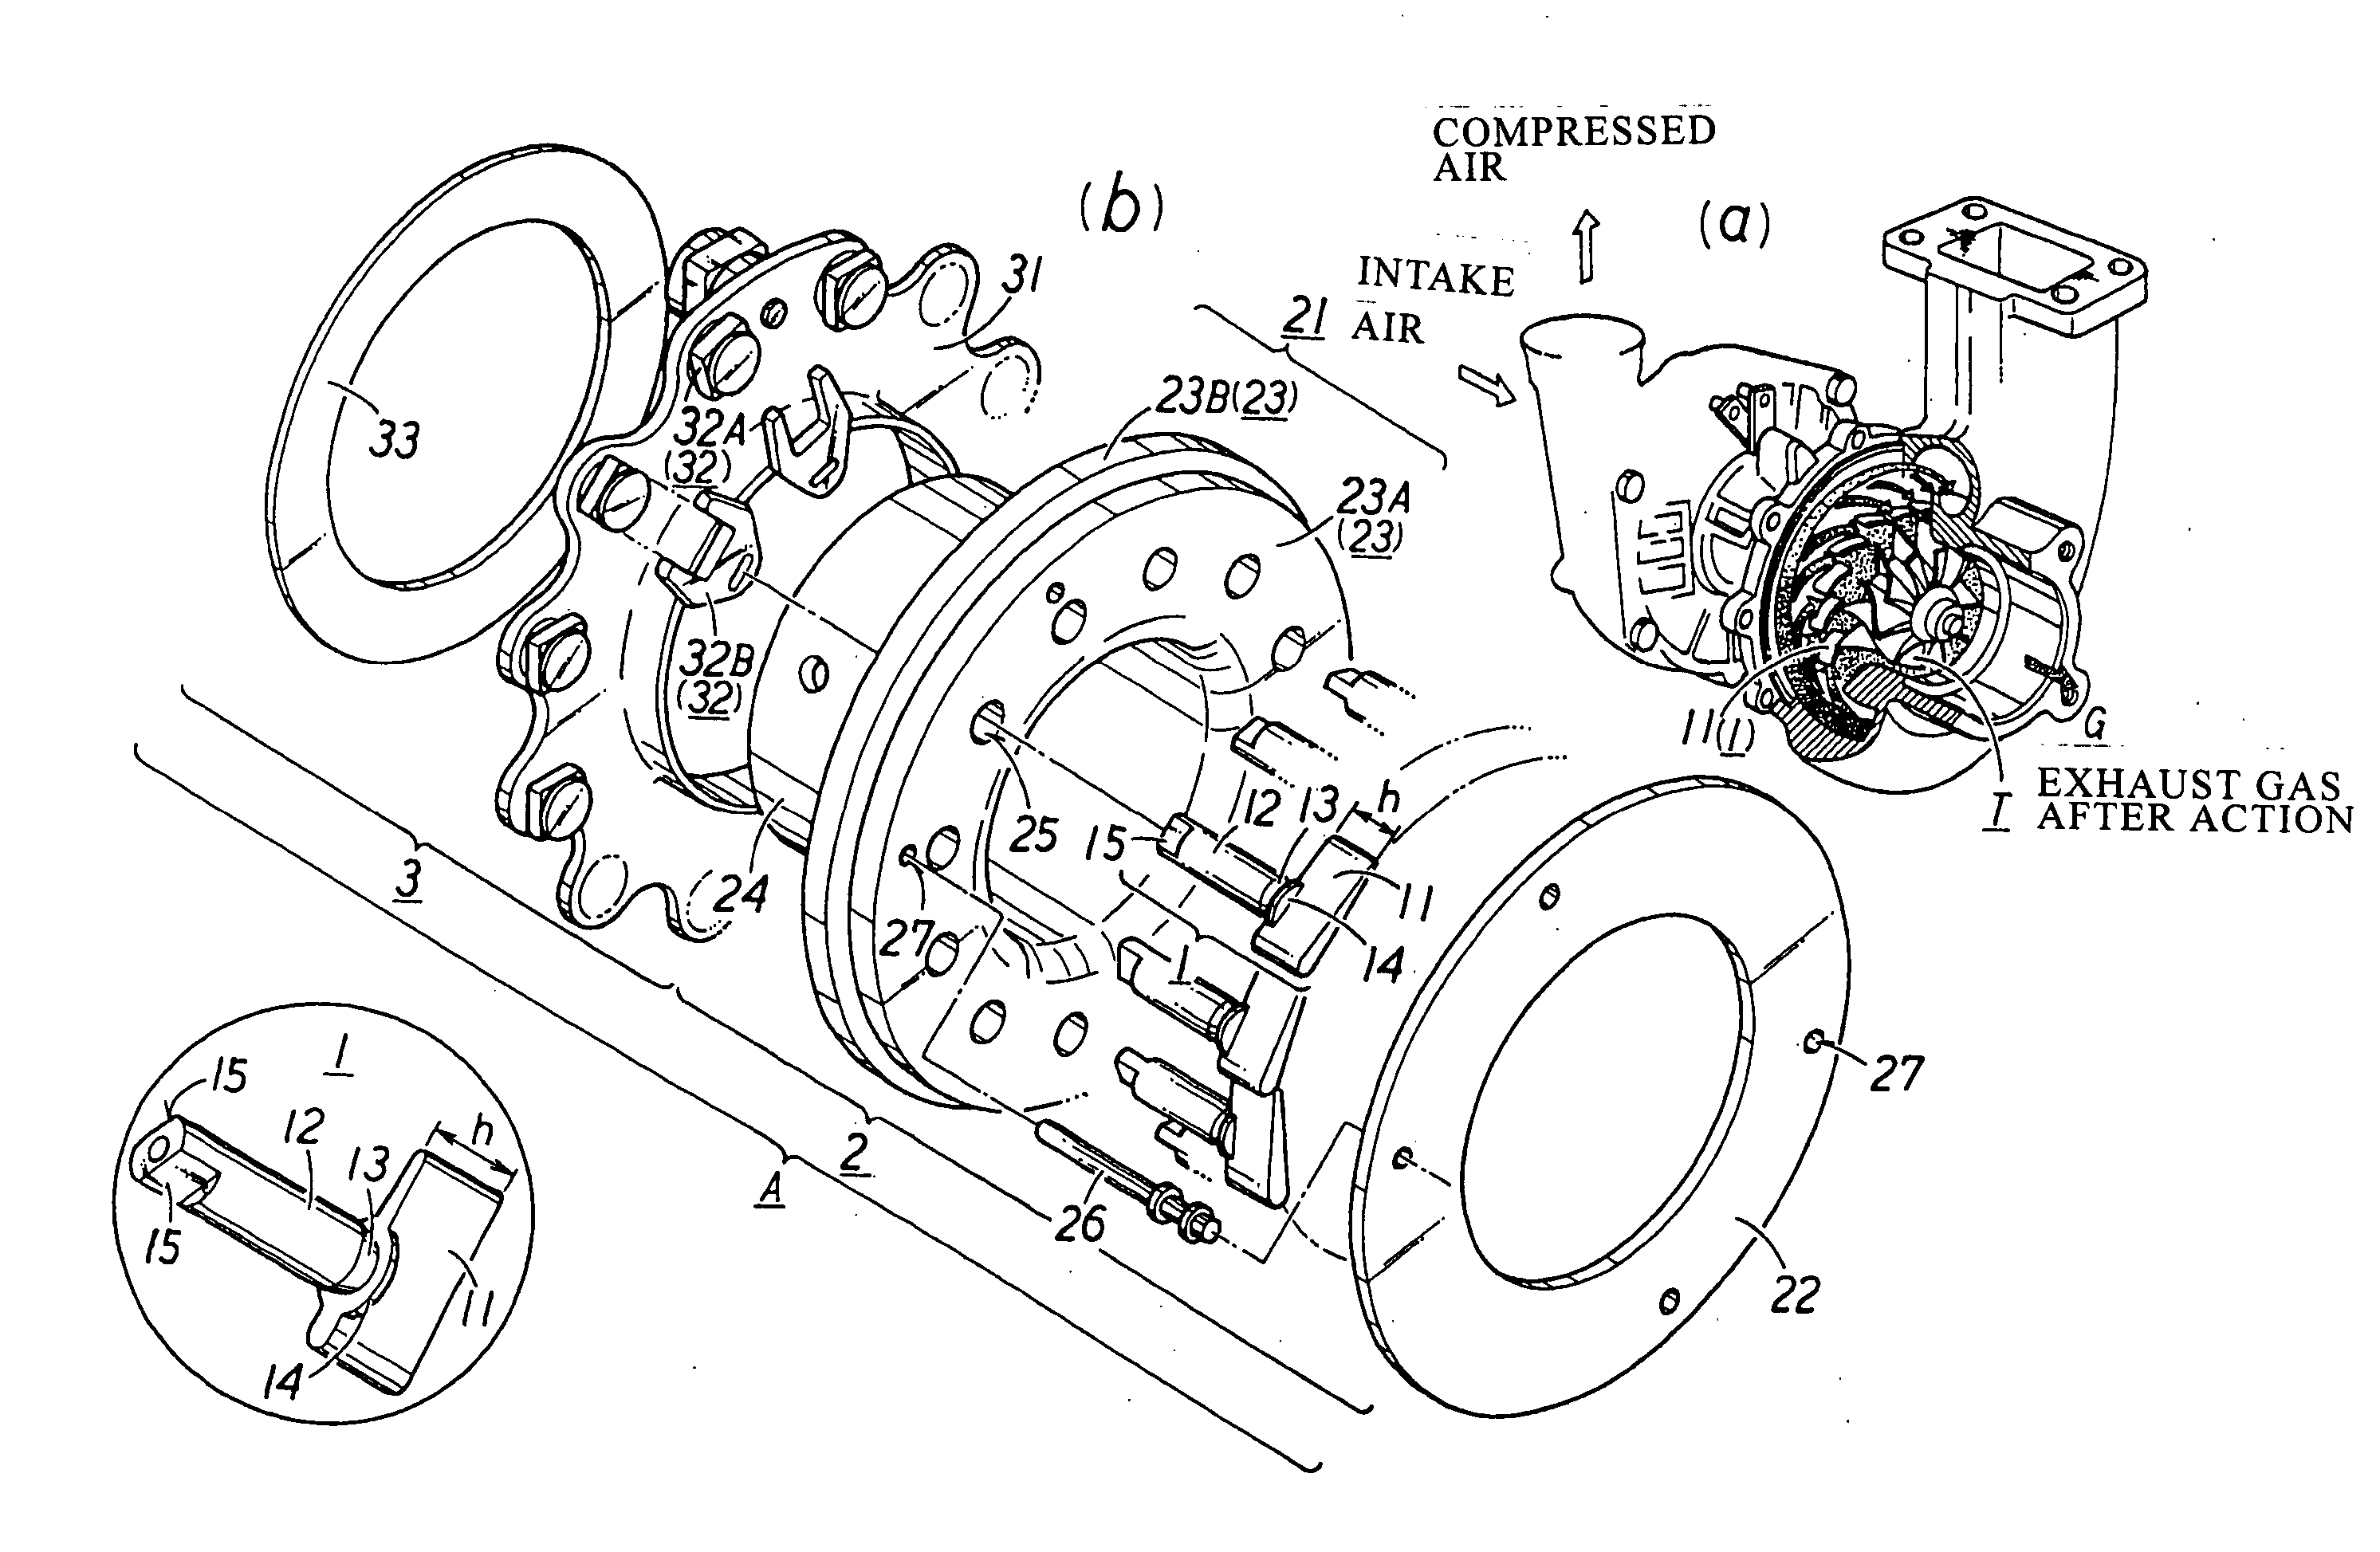 Surface-reformed exhaust gas guide assembly of vgs type turbo charger, and method surface-reforming component member thereof